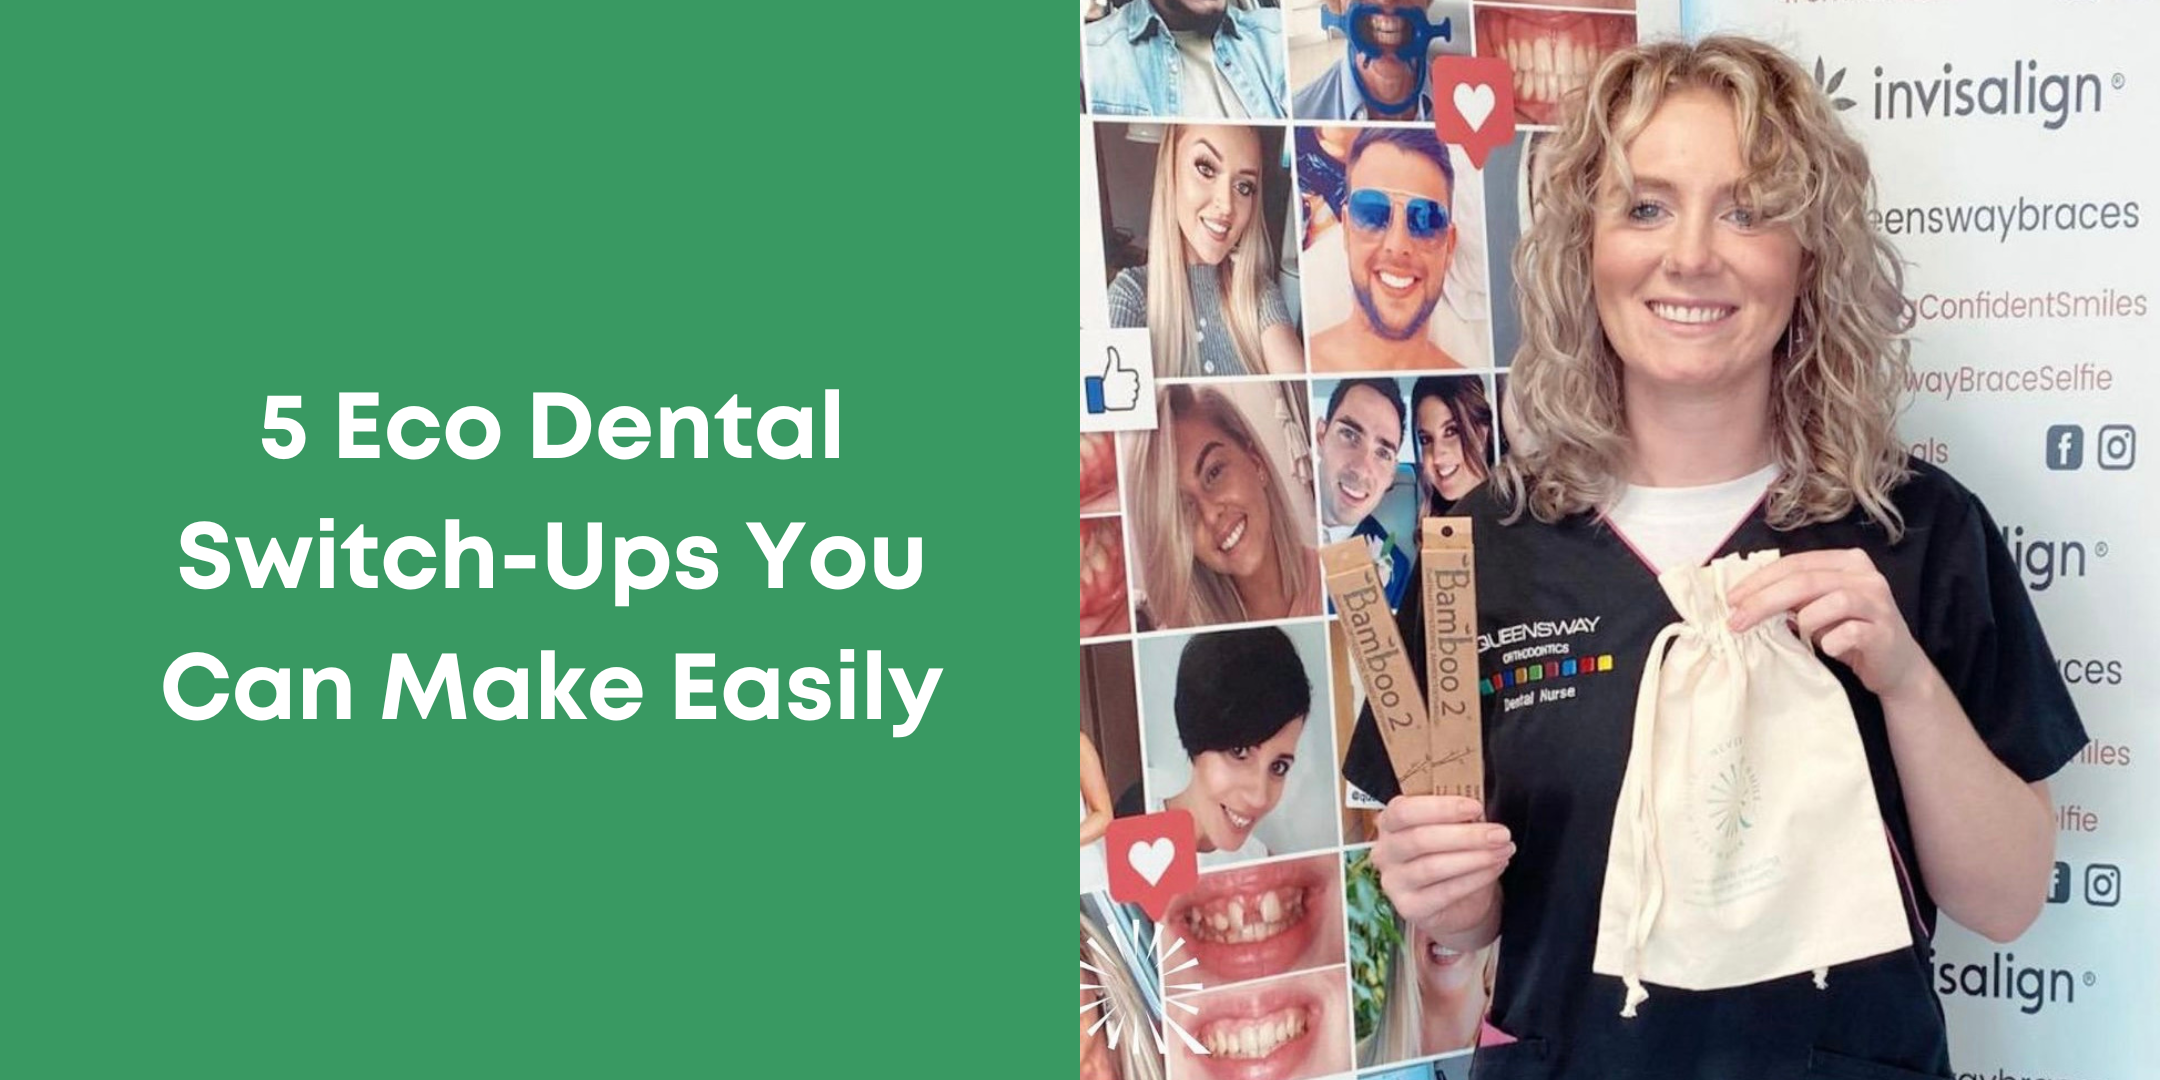 5 Eco Dental Switch-Ups You Can Make Easily